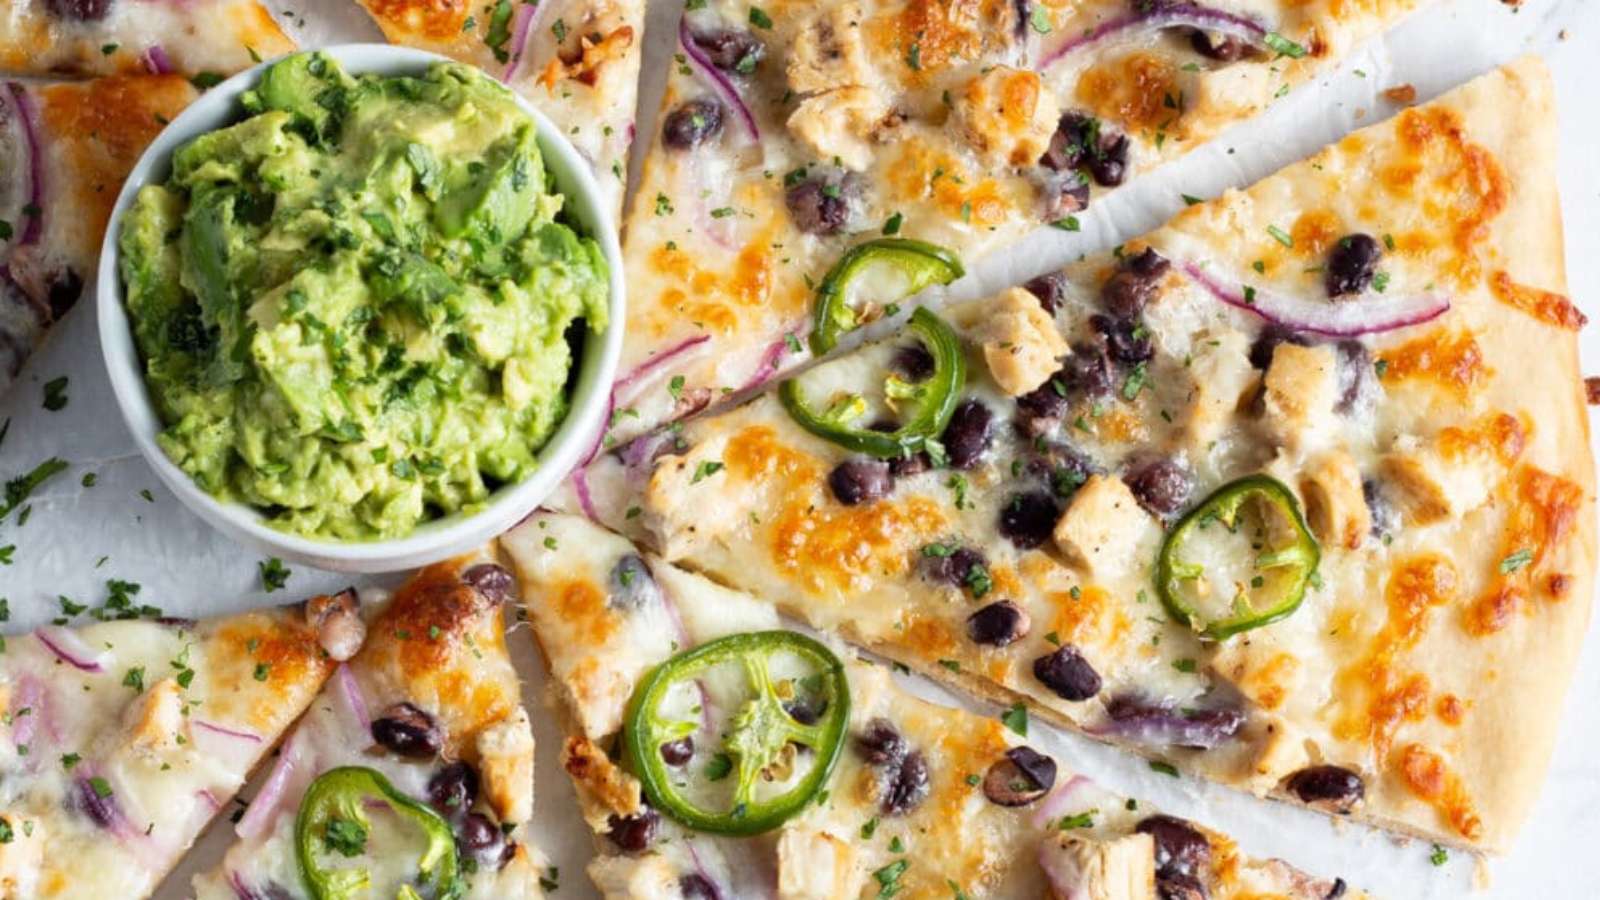 A slice of pizza with guacamole and black olives.